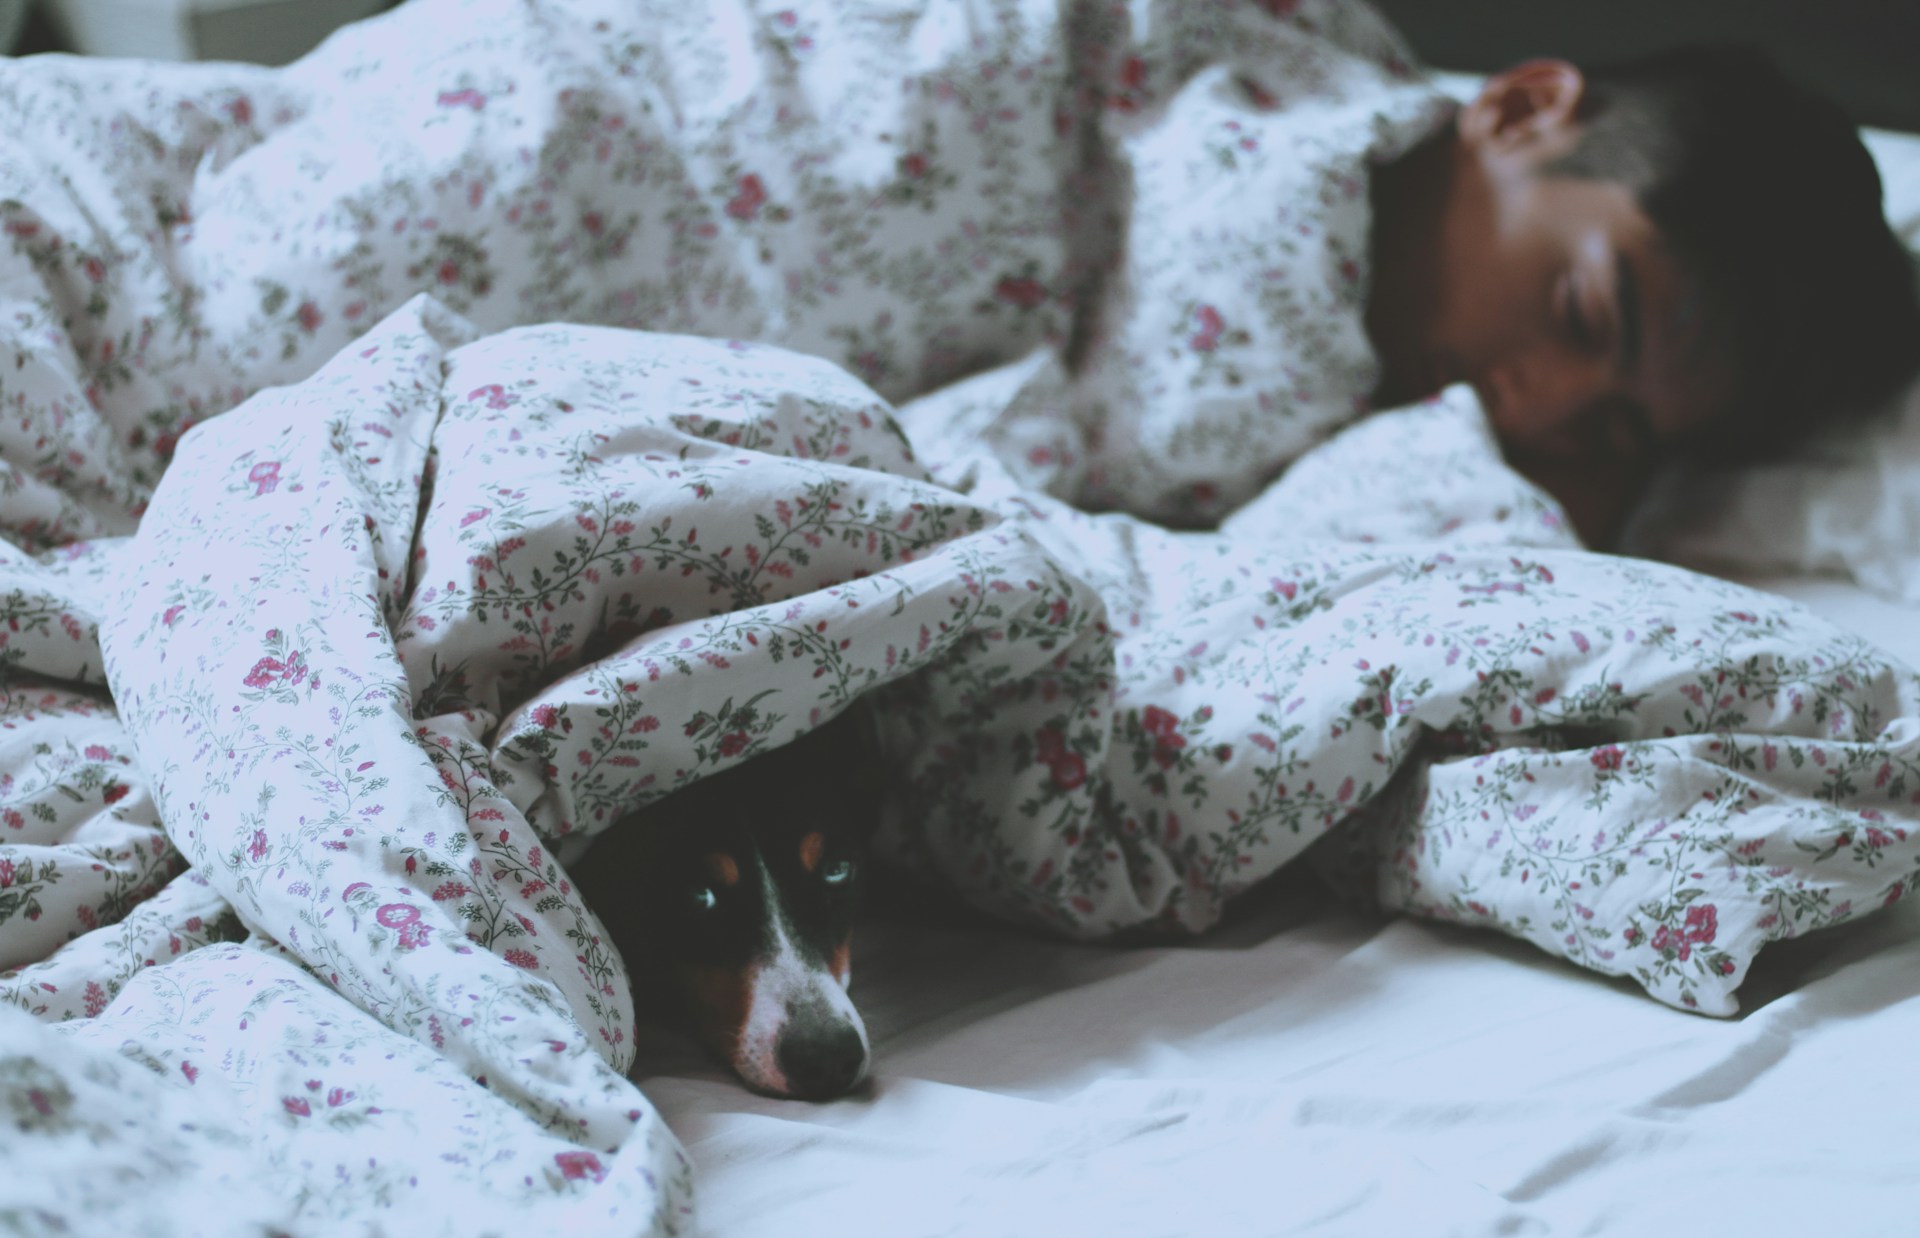 A small dog sleeping in bed next to a child